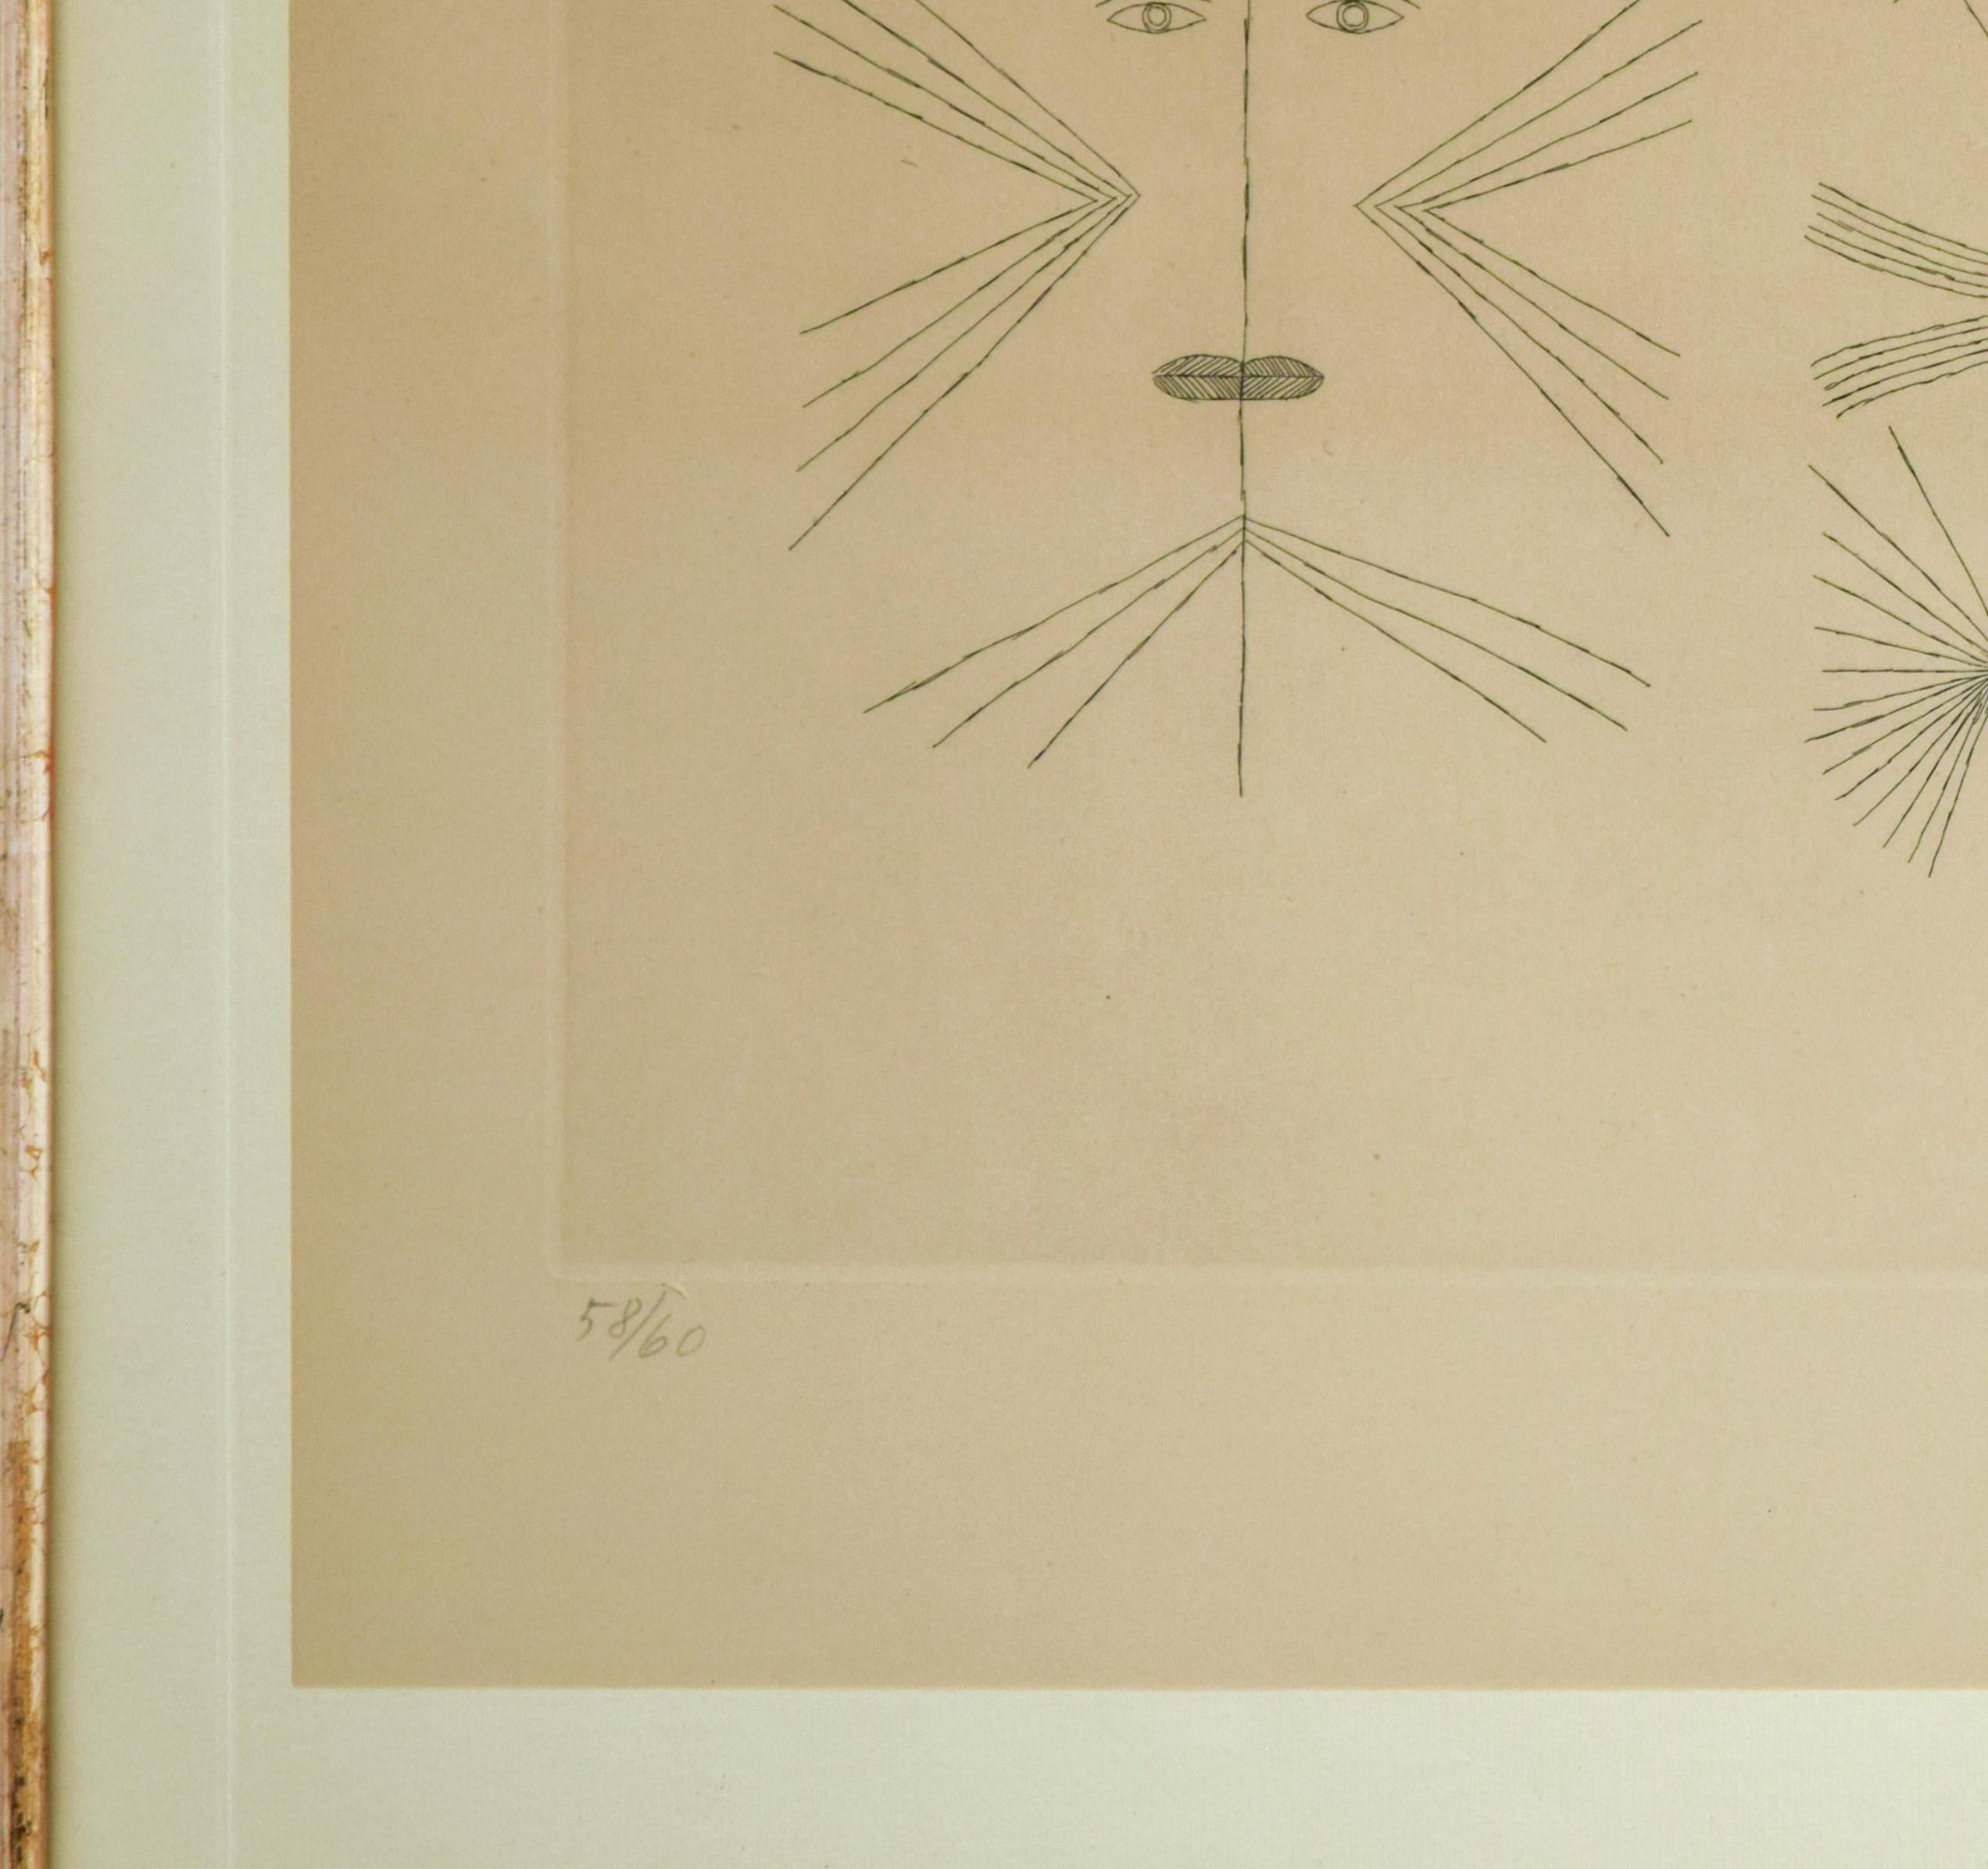 Codex d'un visage is a b/w original etching realized by Romanian Surrealist artist Victor Brauner (1903-1966) in 1962.

Signed, dated in pencil on lower margin. Numbered in Arabic numerals, from an edition of 60 prints. 

The total edition includes